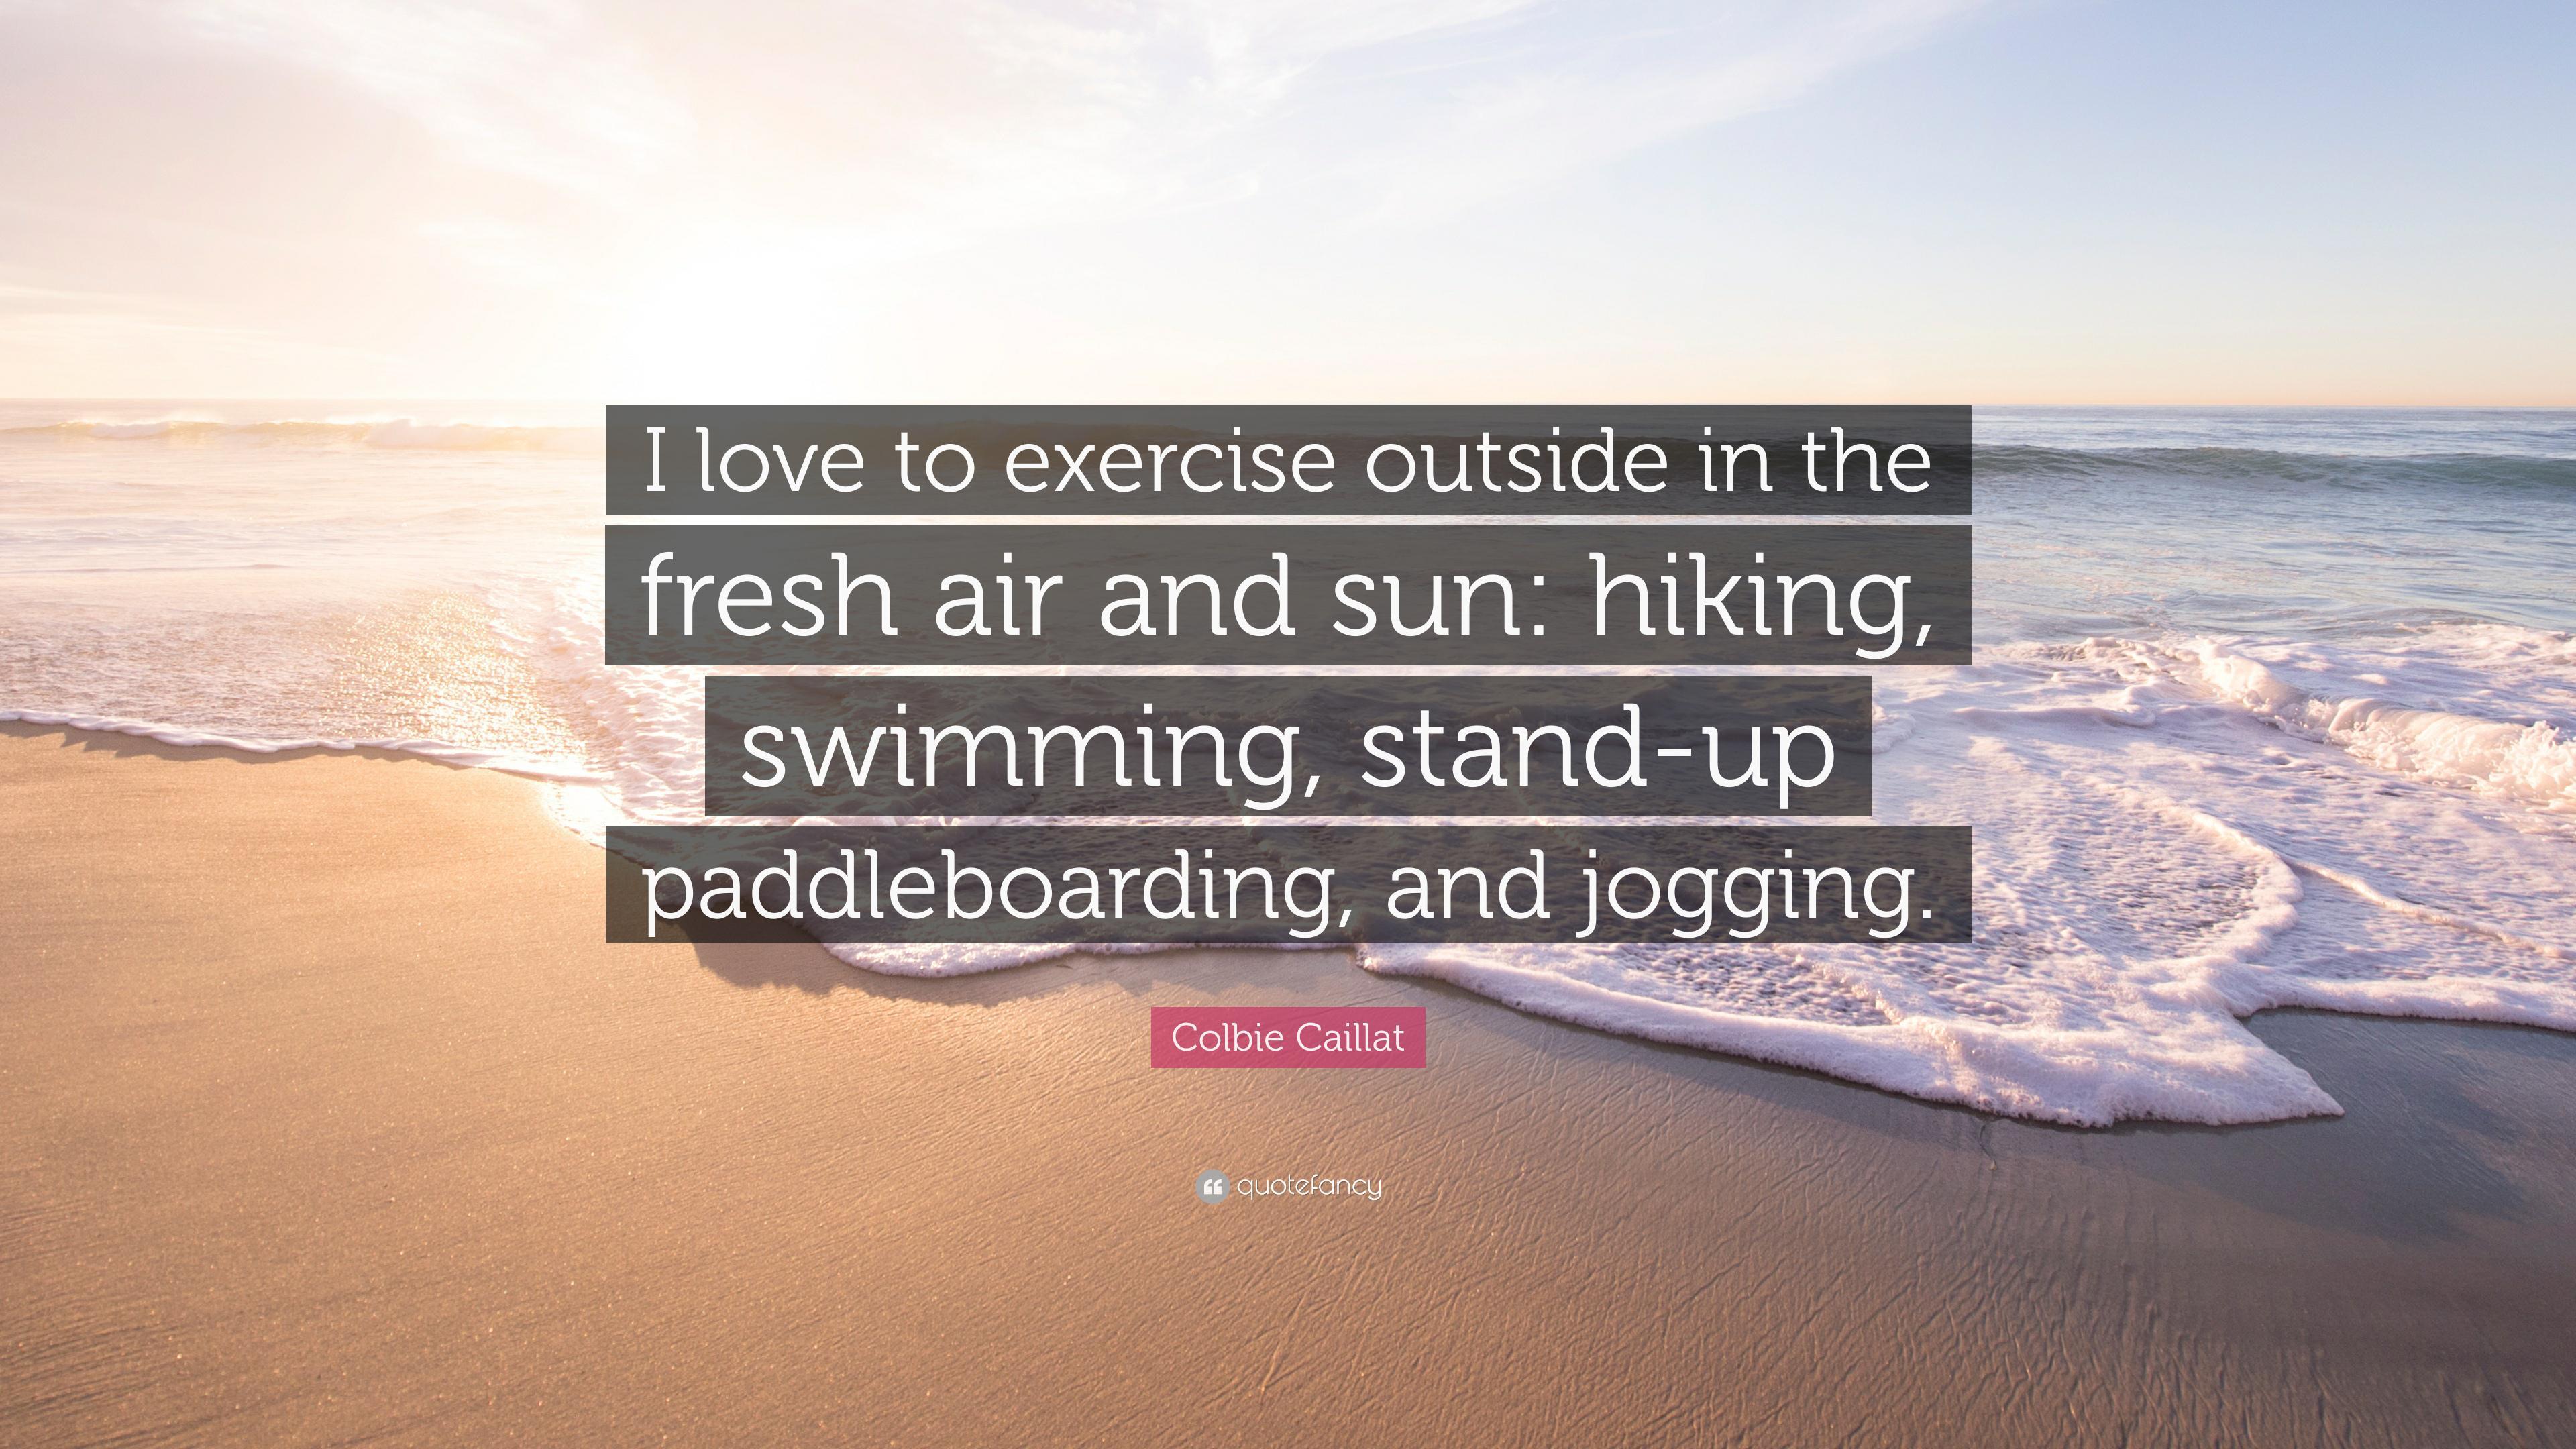 Colbie Caillat Quote: "I love to exercise outside in the fresh air.